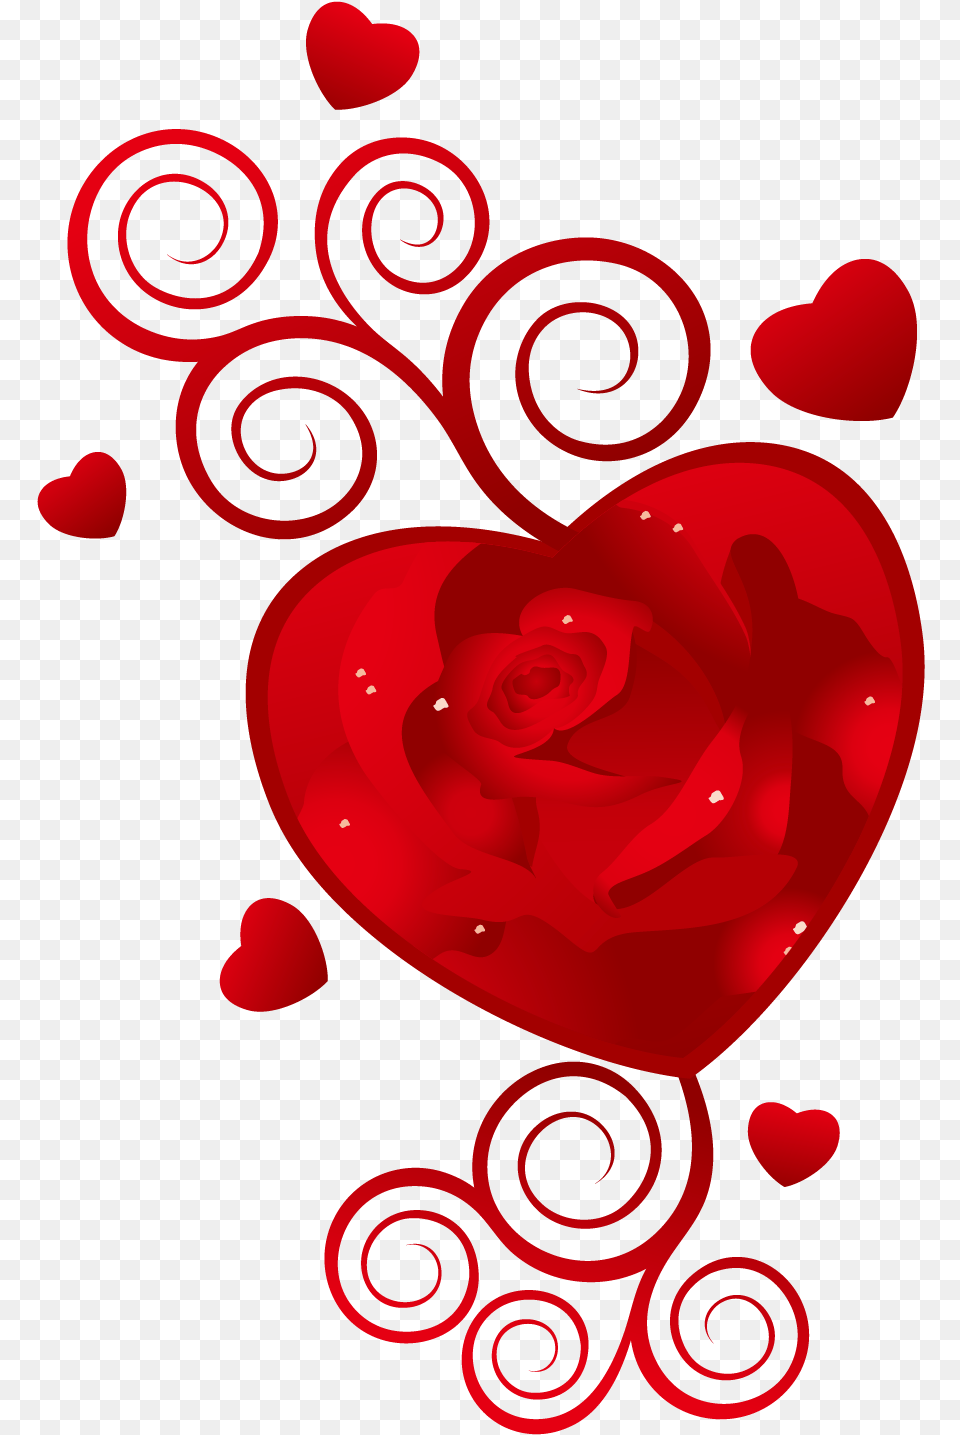 Heart February 14 Wish Valentines Vector Rose Clipart Happy Valentine Day 2018, Flower, Plant, Art, Graphics Png